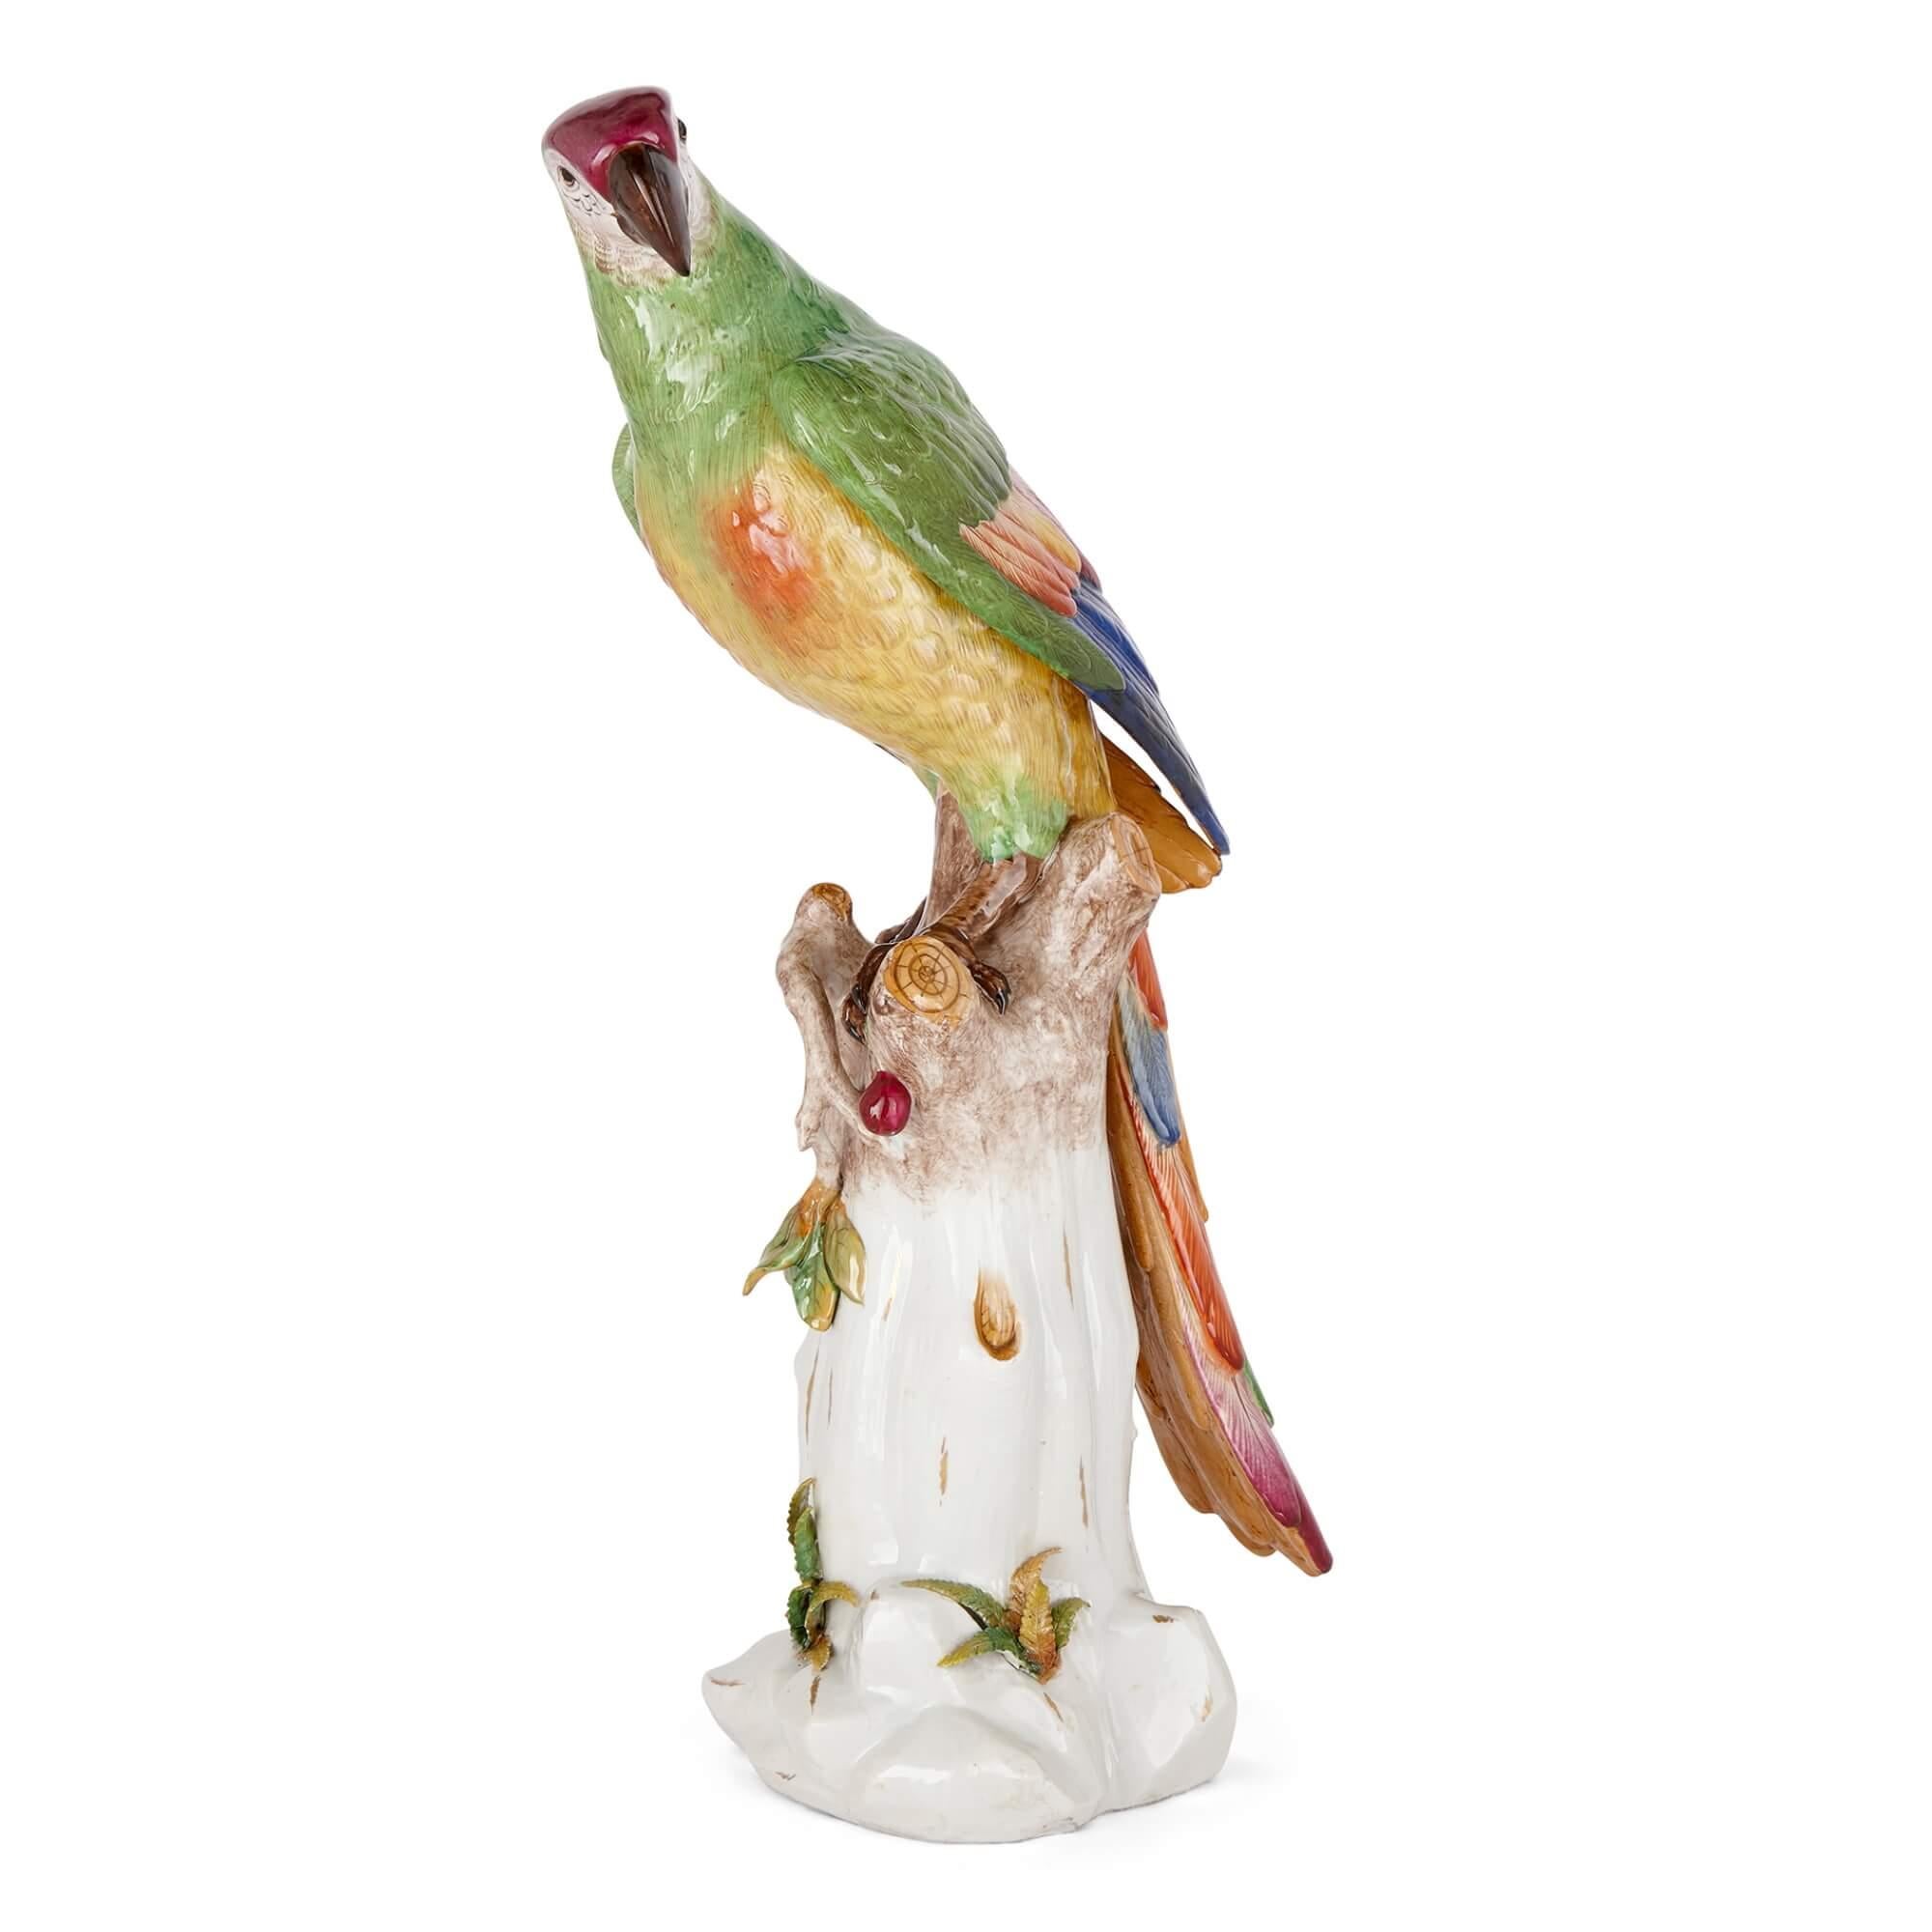 Modern Very Large Volkstedt Porcelain Sculpture of a Parrot For Sale